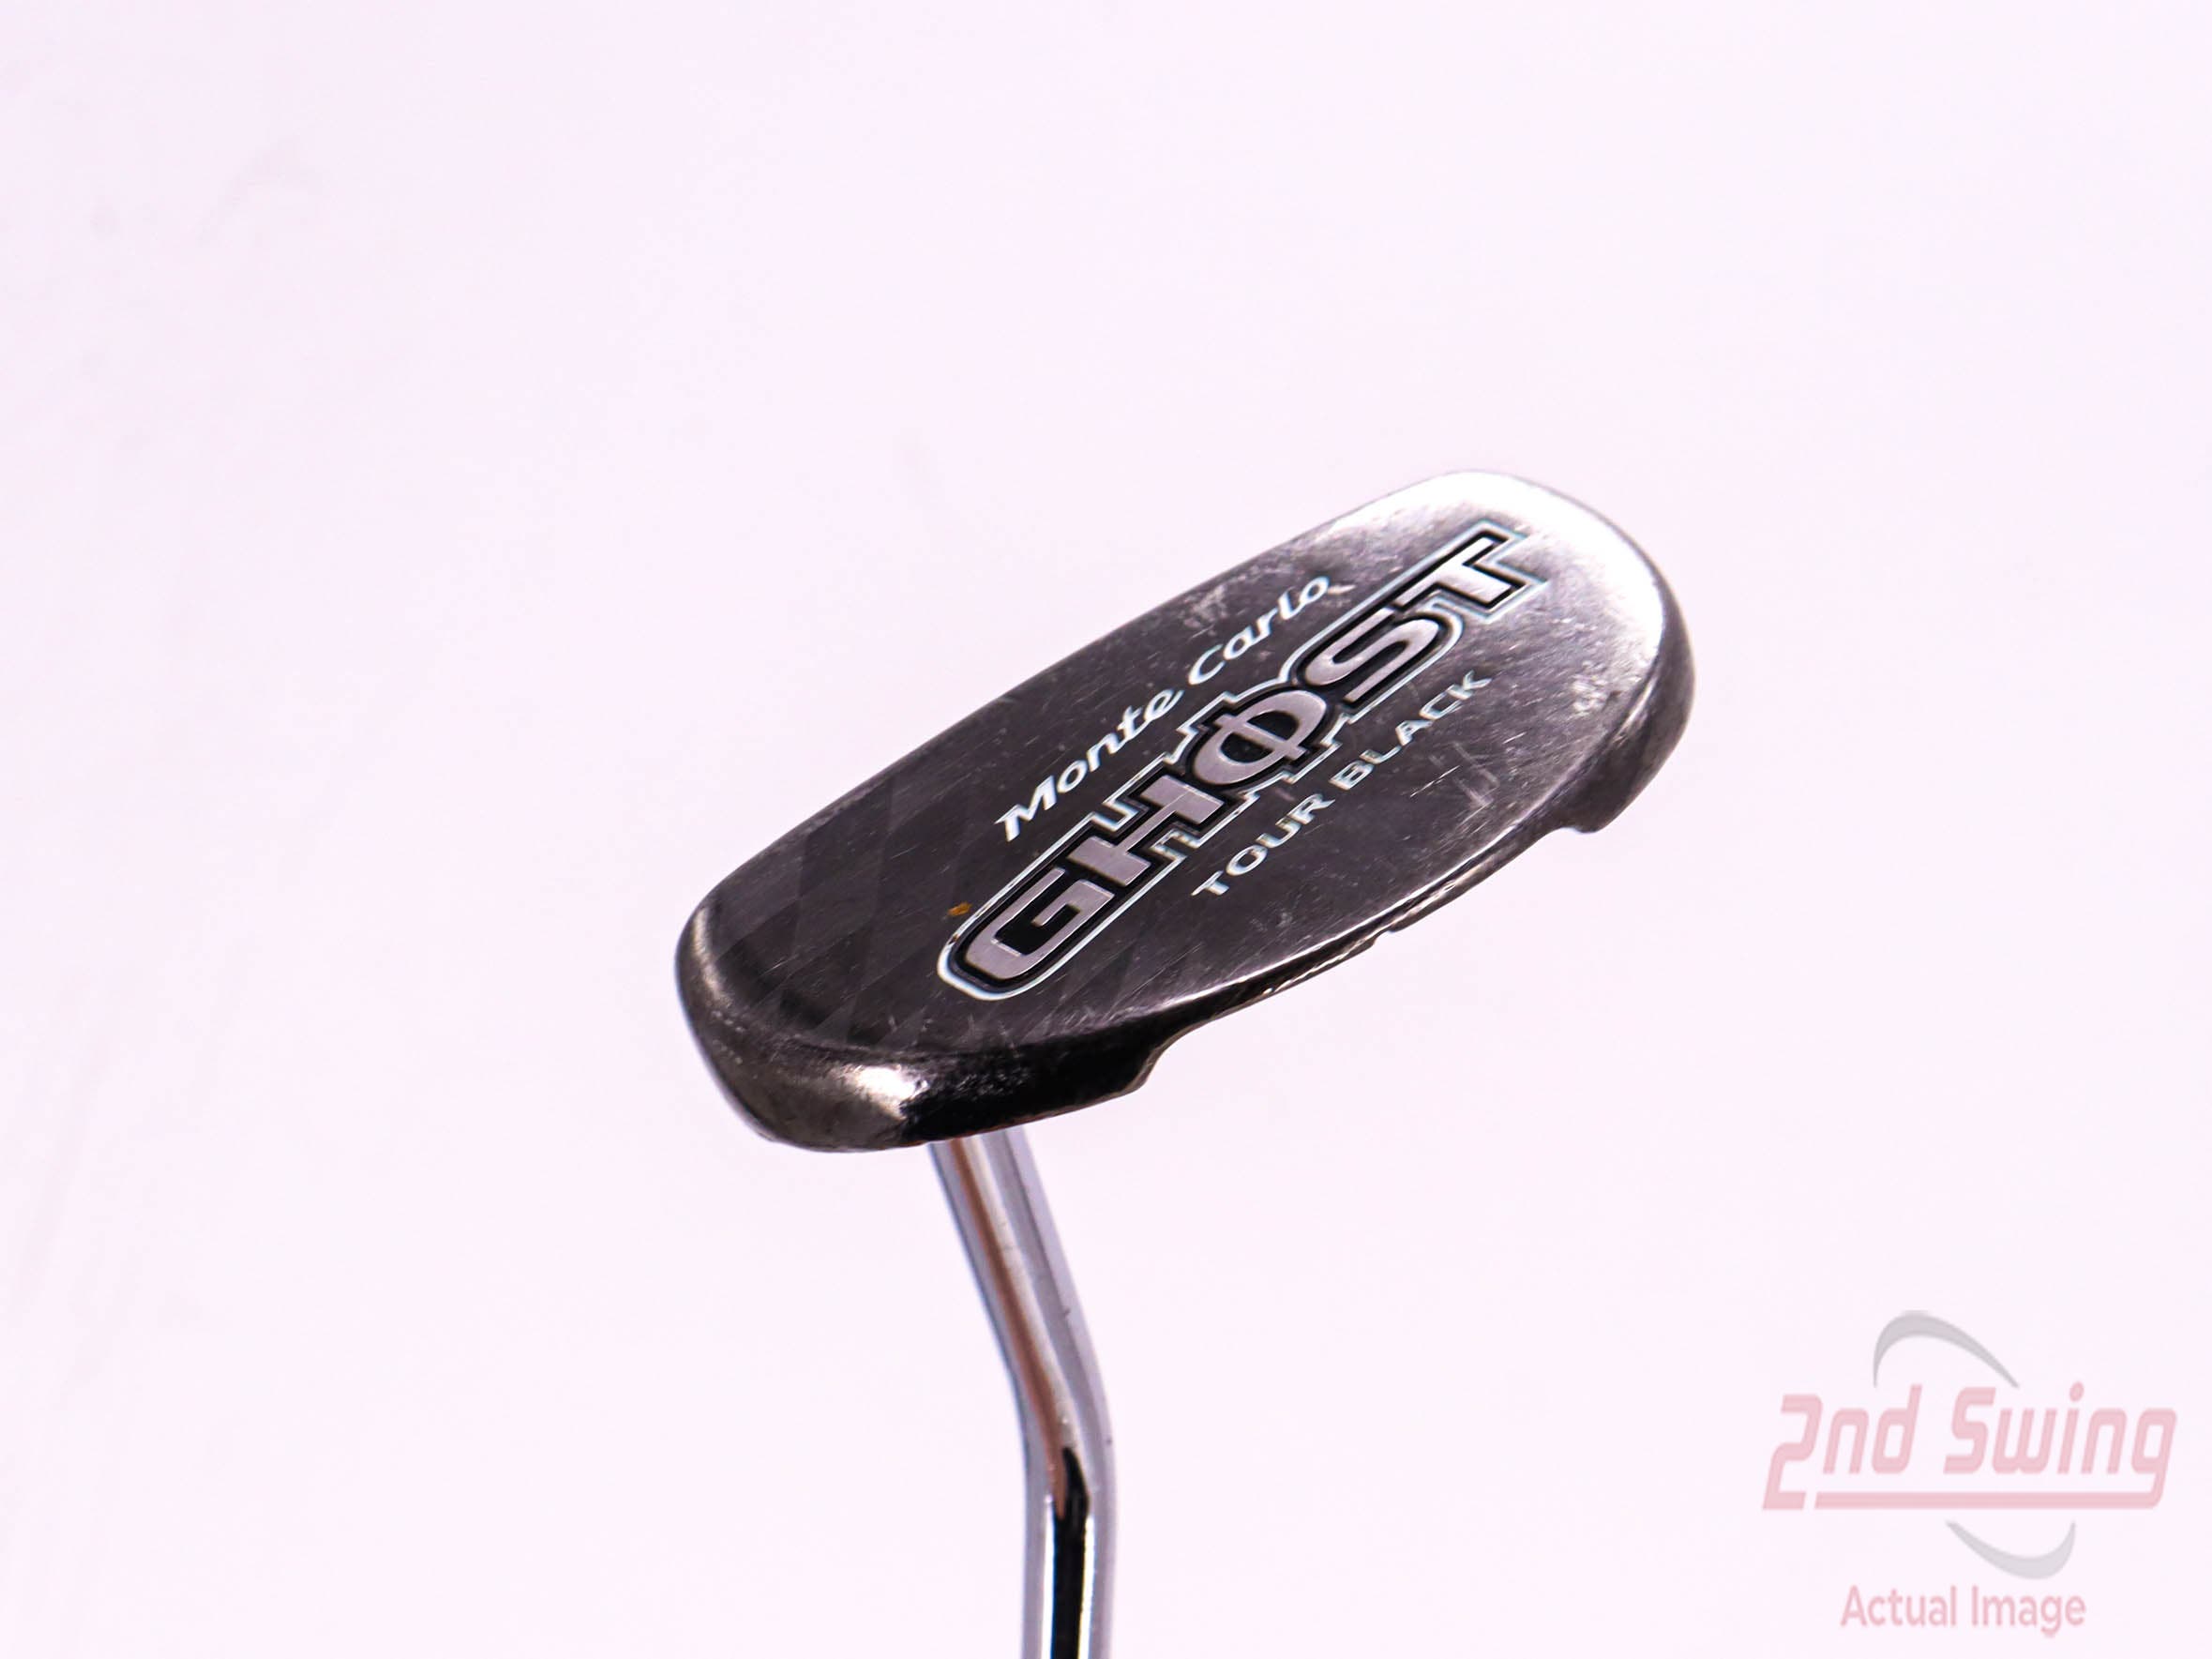 TaylorMade Ghost Tour Black Monte Carlo Putter | 2nd Swing Golf